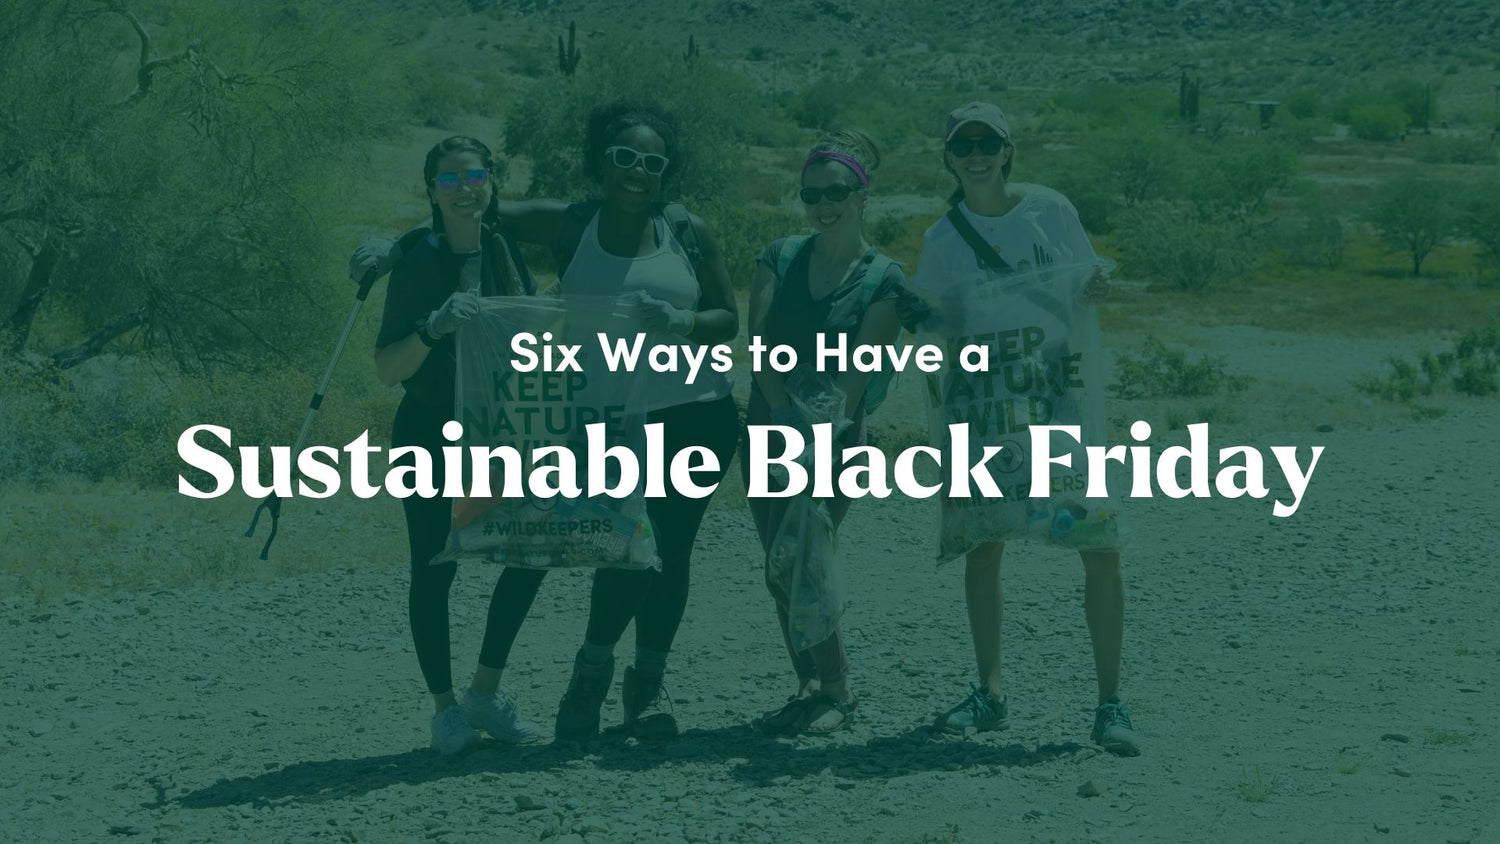 Six Ways to Have a Sustainable Black Friday